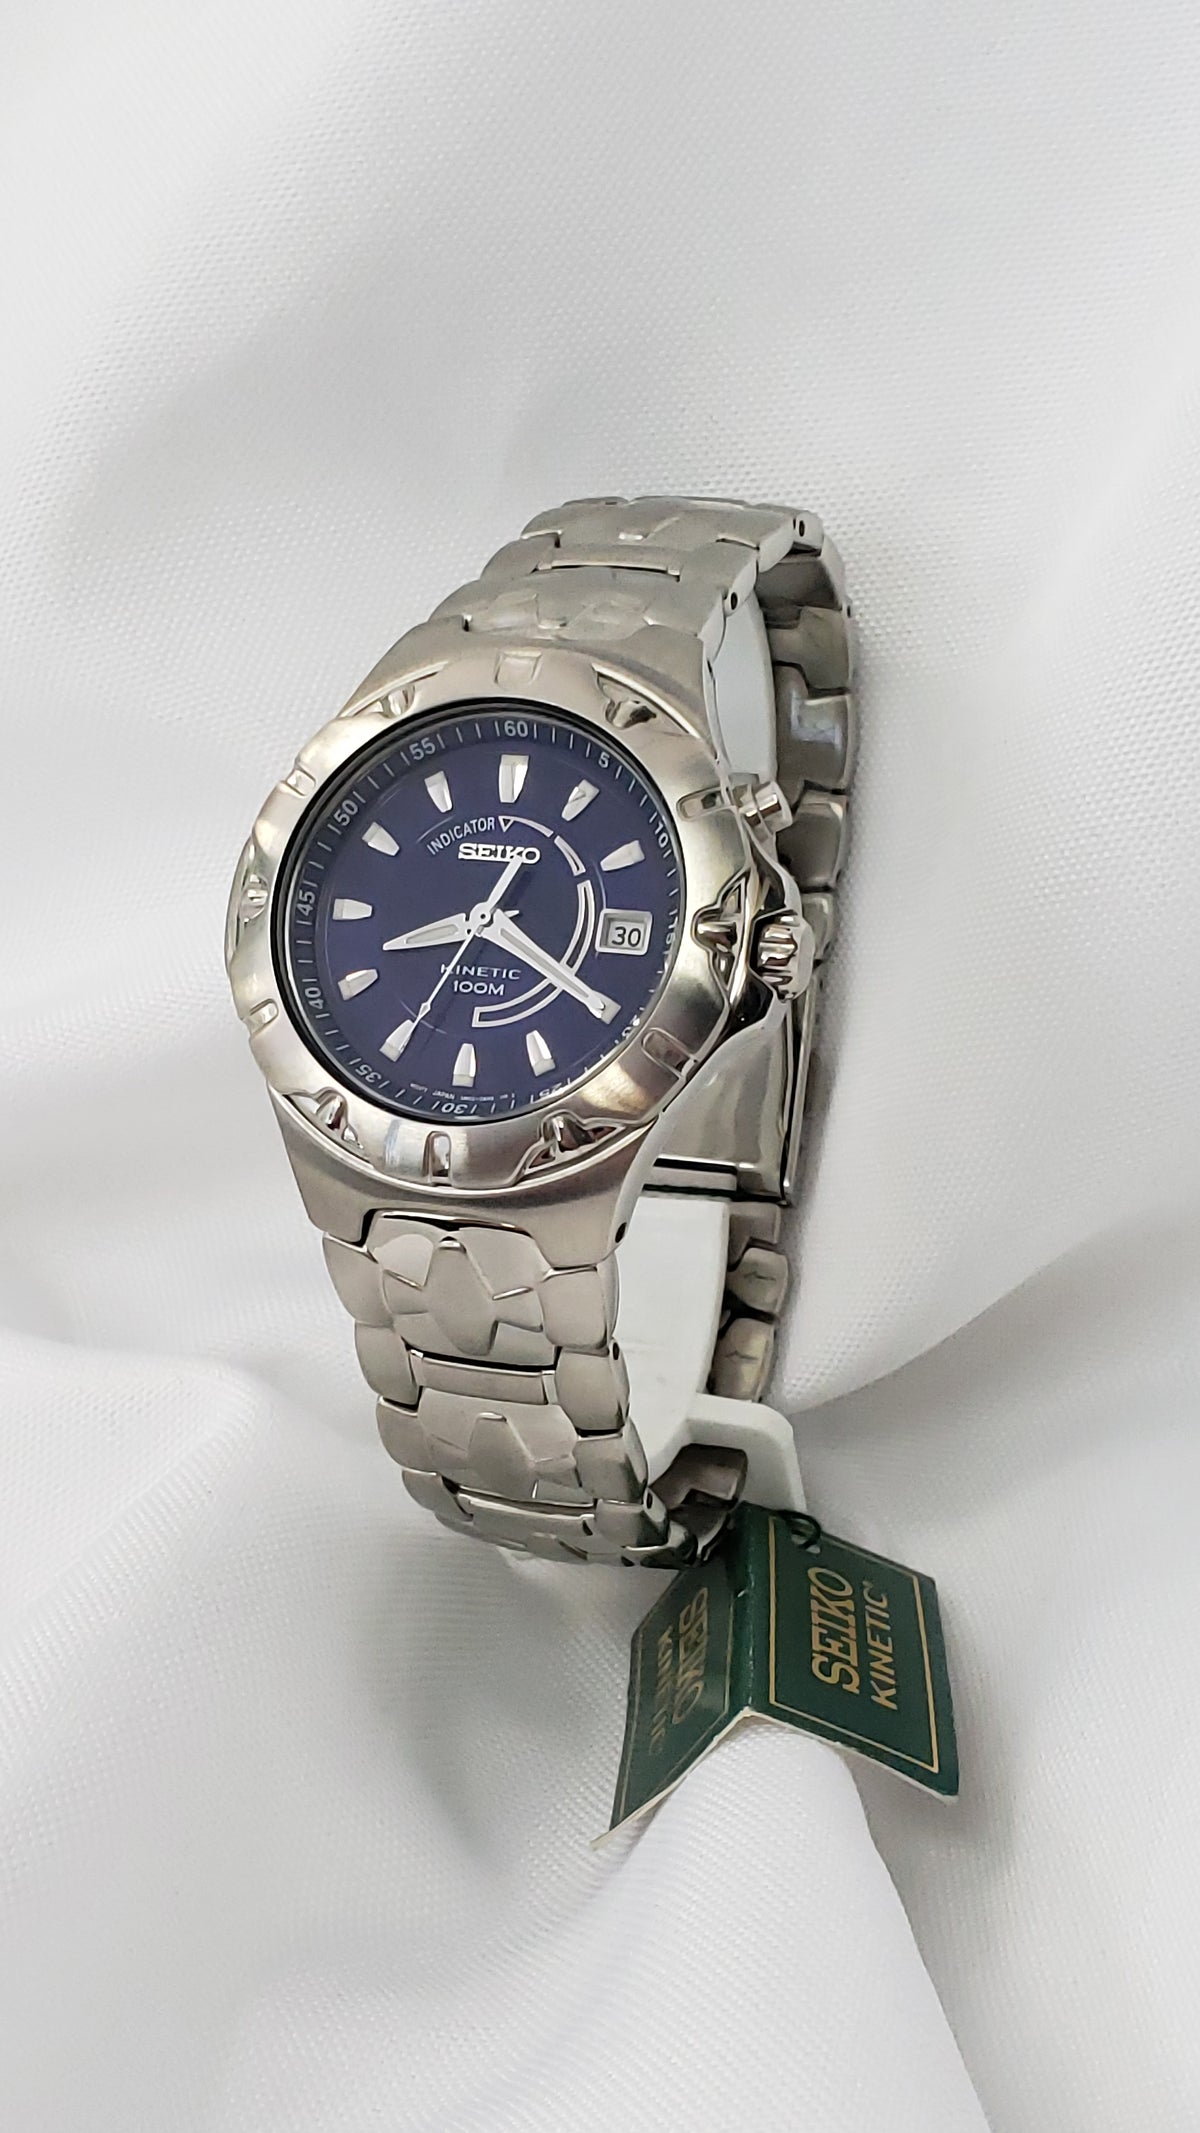 Seiko SKA193 Kinetic Blue Dial Stainless Steel Silver Tone Date Watch